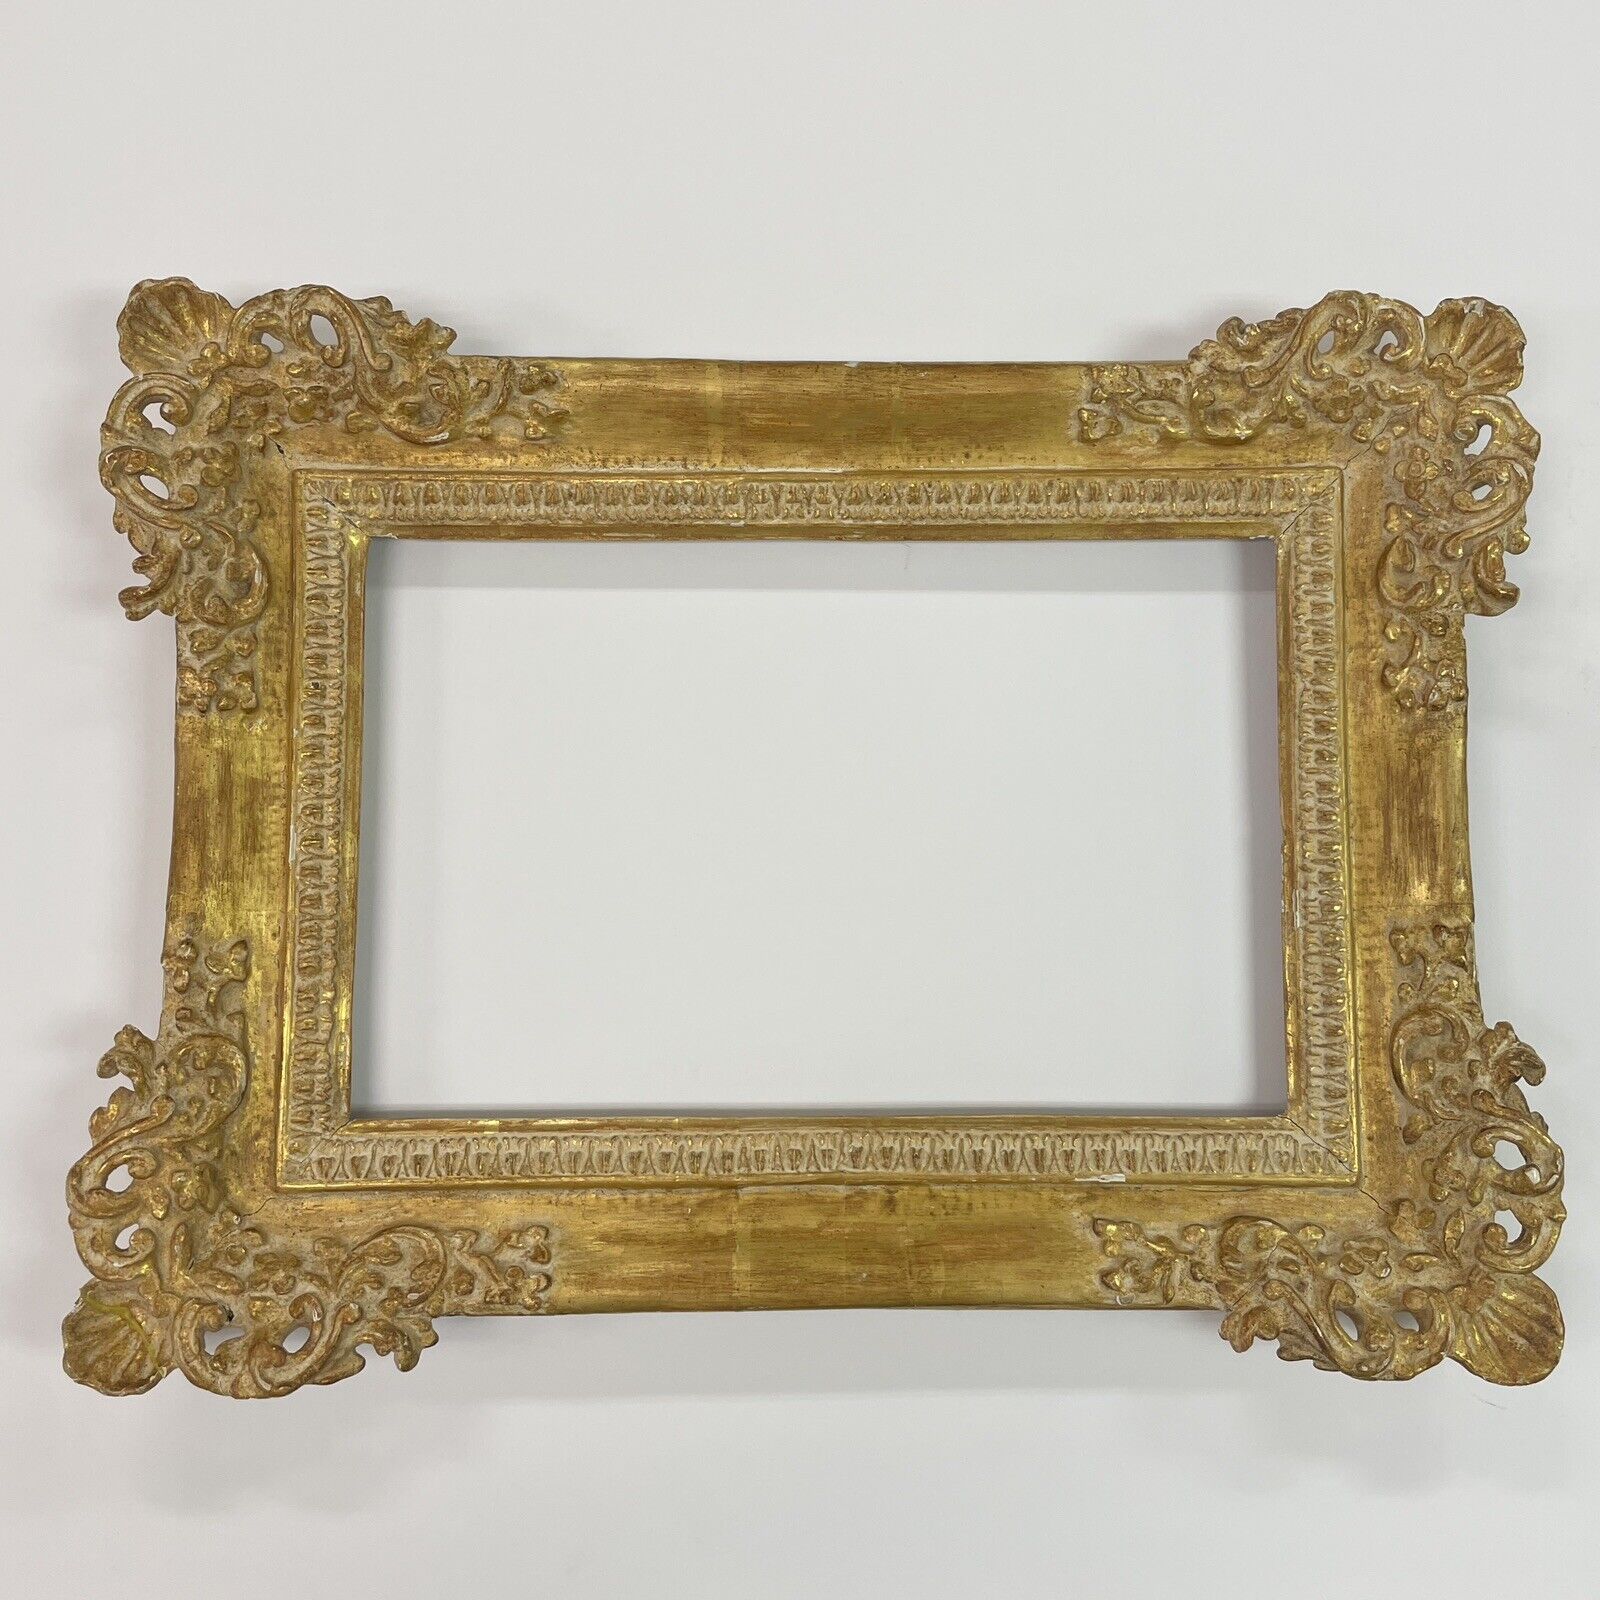 Antique Late 19c Carved Ornate French Louis XIII Style Gilt Gold Leaf Wood Frame